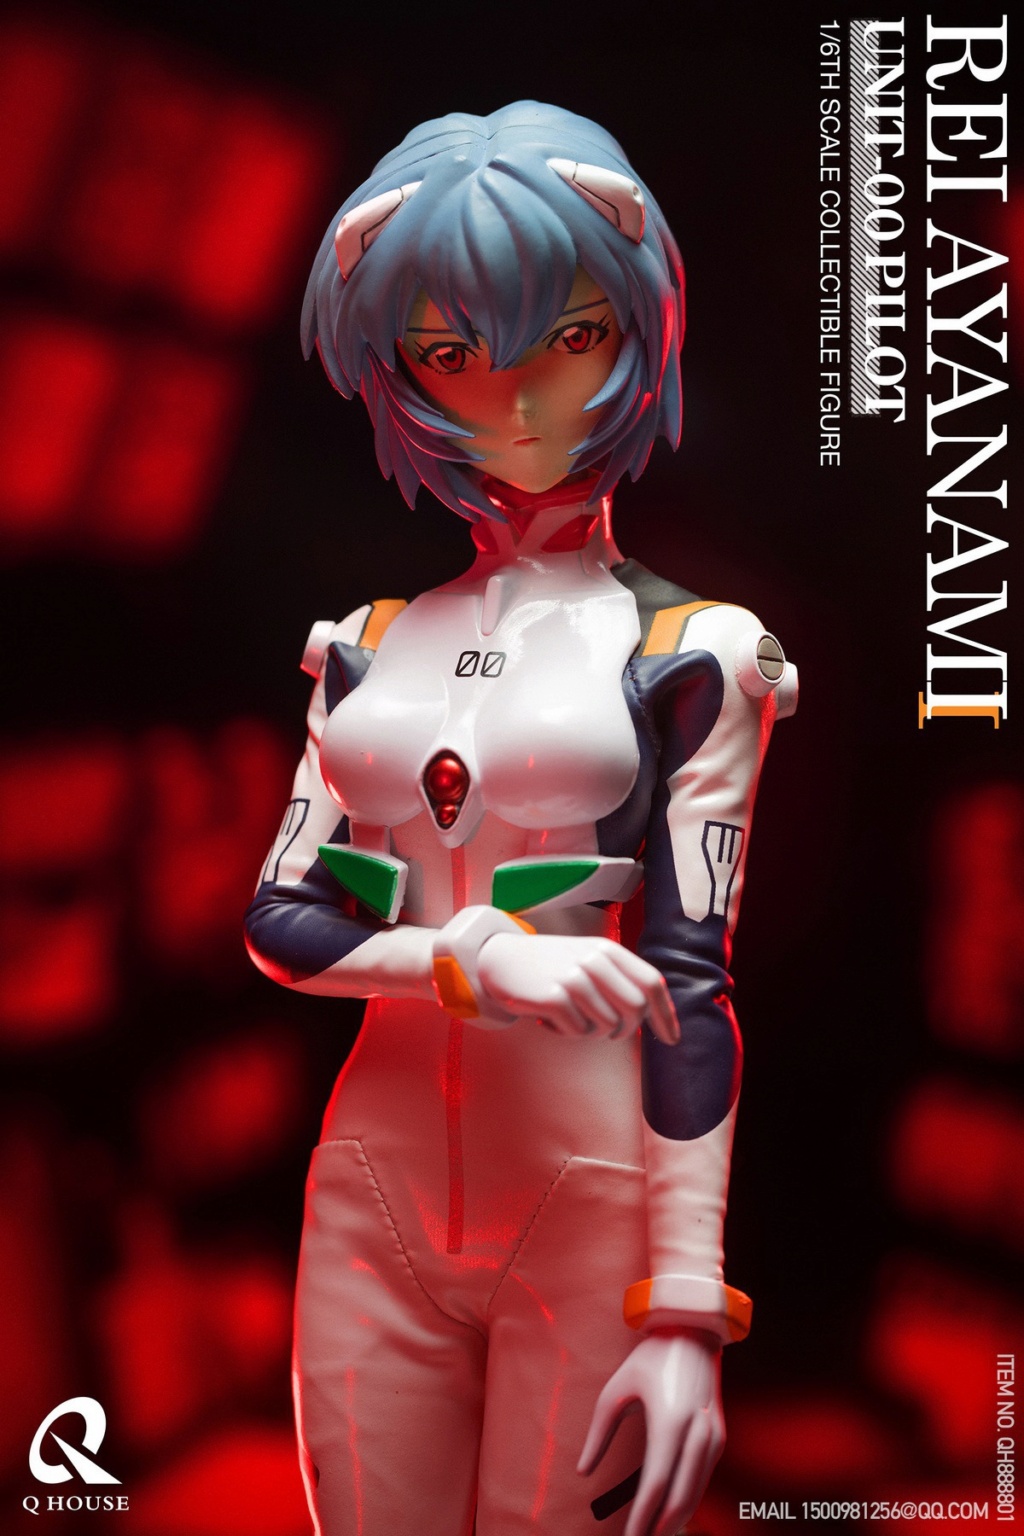 Anime - NEW PRODUCT: Q House: 1/6 Evangelion - Rei Ayanami  11142810